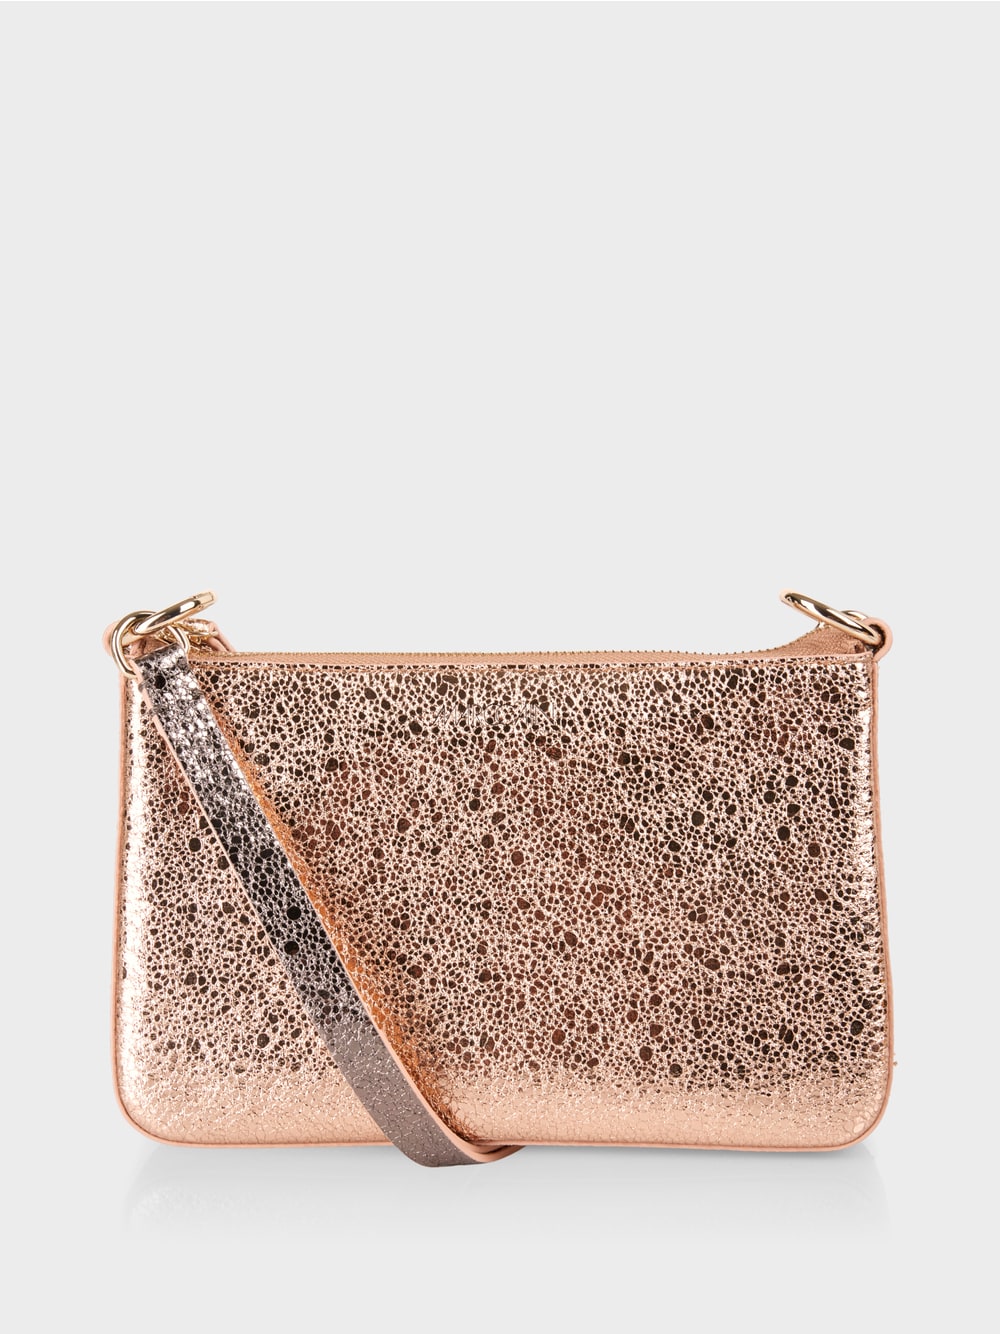 Marc Cain Rose Gold Mini bag with metallic effect